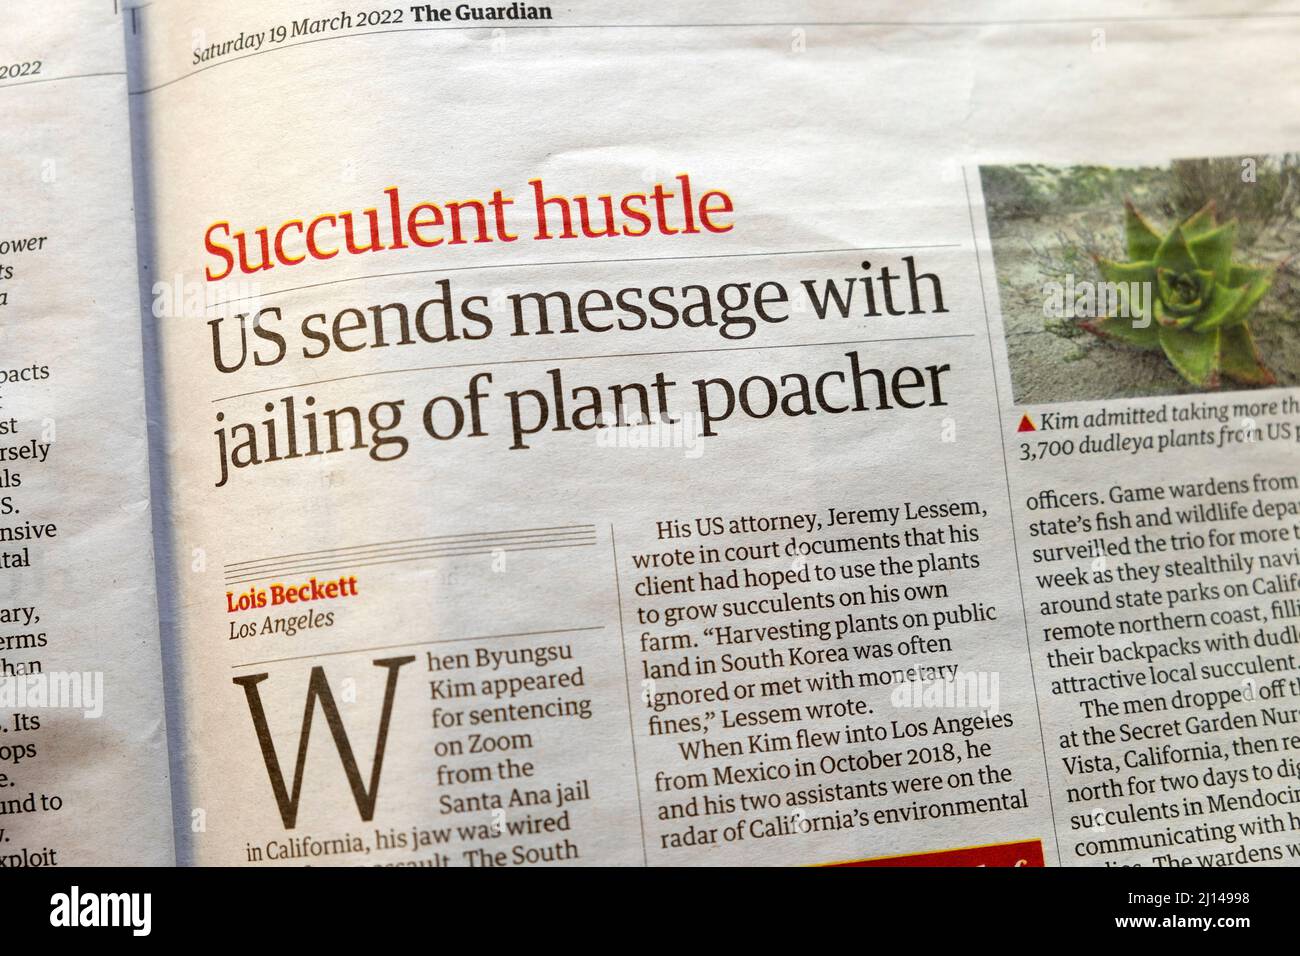 'Succulent hustle US sends message with jailing of plant poacher' Environment Guardian newspaper headline article 19 March 2022 London UK Stock Photo